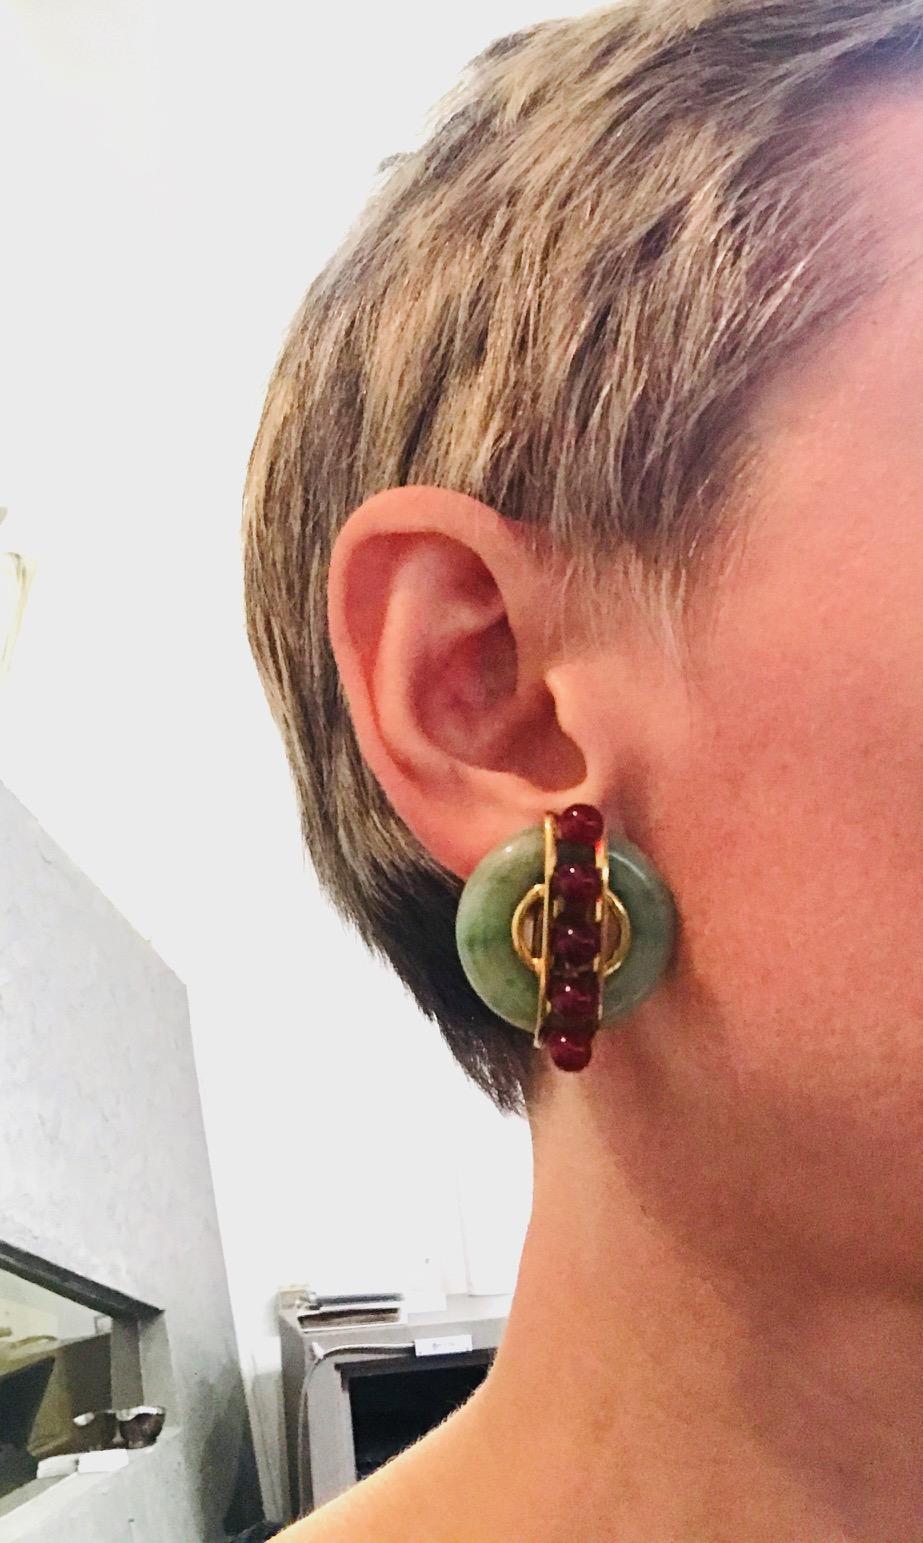 Vintage (c. 1970s) clip-on earrings by Aldo Cipullo for Cartier. Disks are made of jade. The carnelian balls are vertically framed in 18k yellow gold. Stamped with the A. Cipullo and Cartier makers marks, a year of production (1974) and a serial